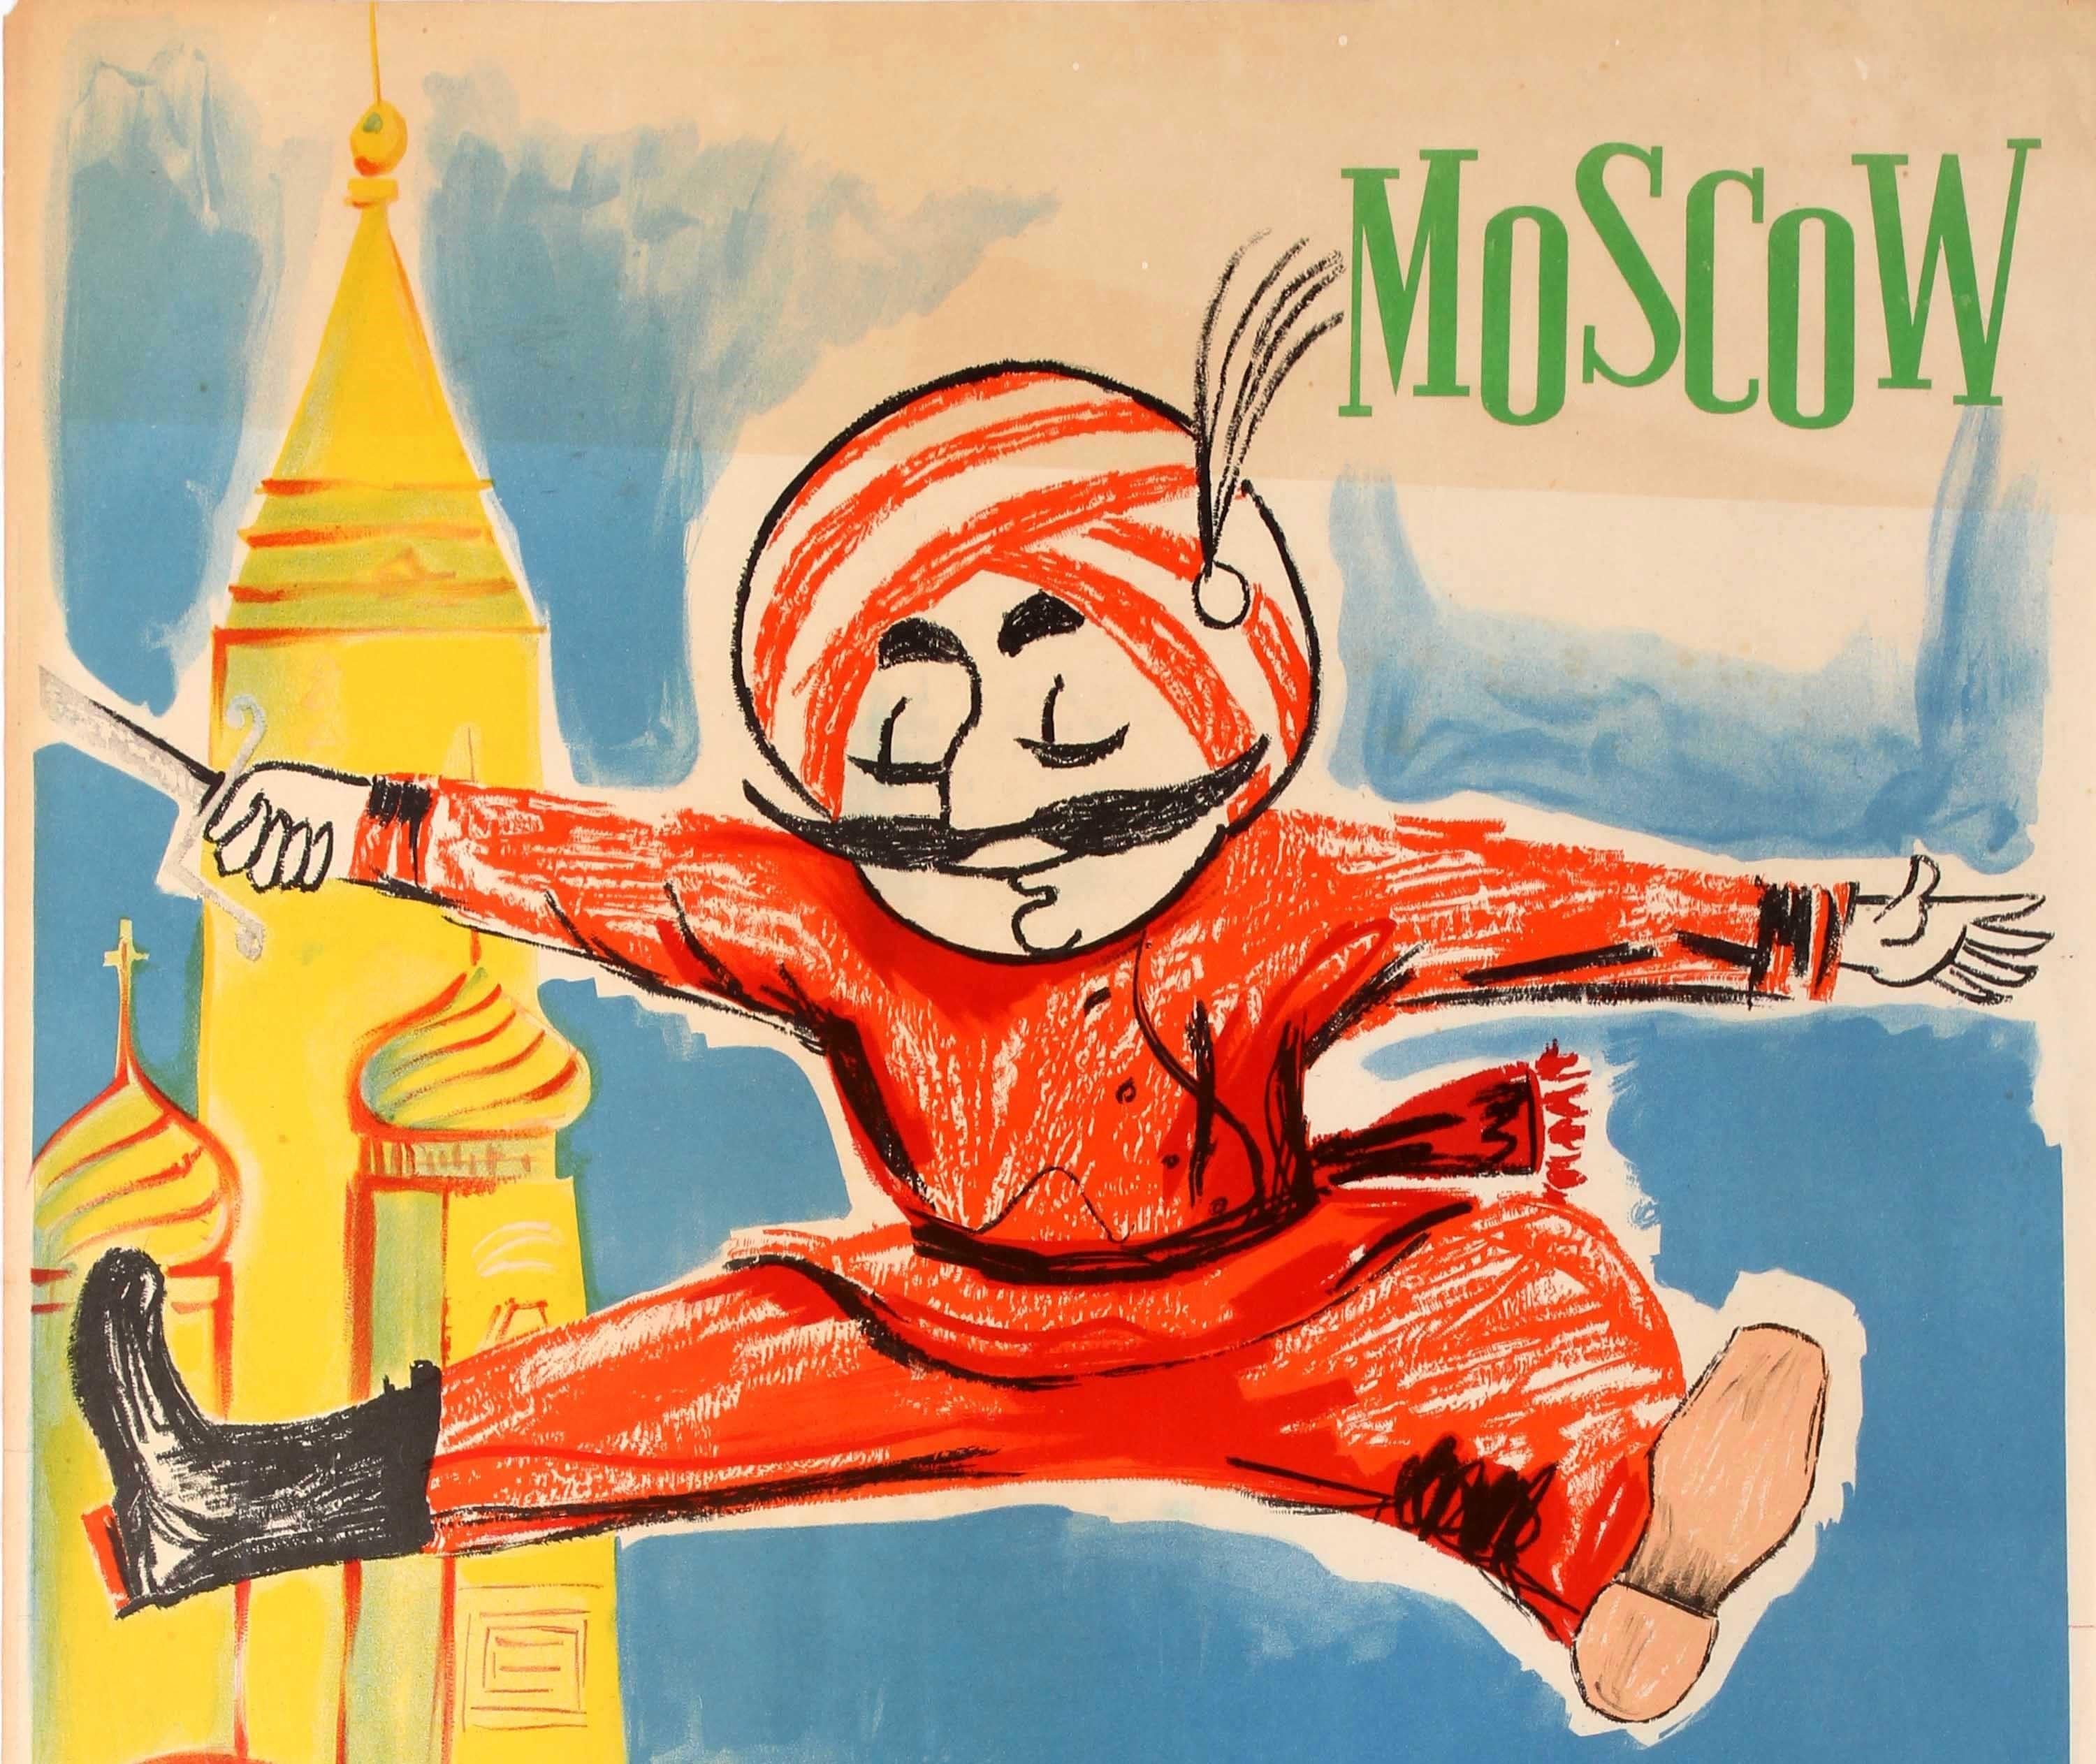 Original vintage Air India travel poster advertising the capital of Russia - Moscow - featuring a fun and colourful image of the Air India mascot, a Maharajah, wearing three different outfits Cossack dancing and jumping in Red Square with the ground